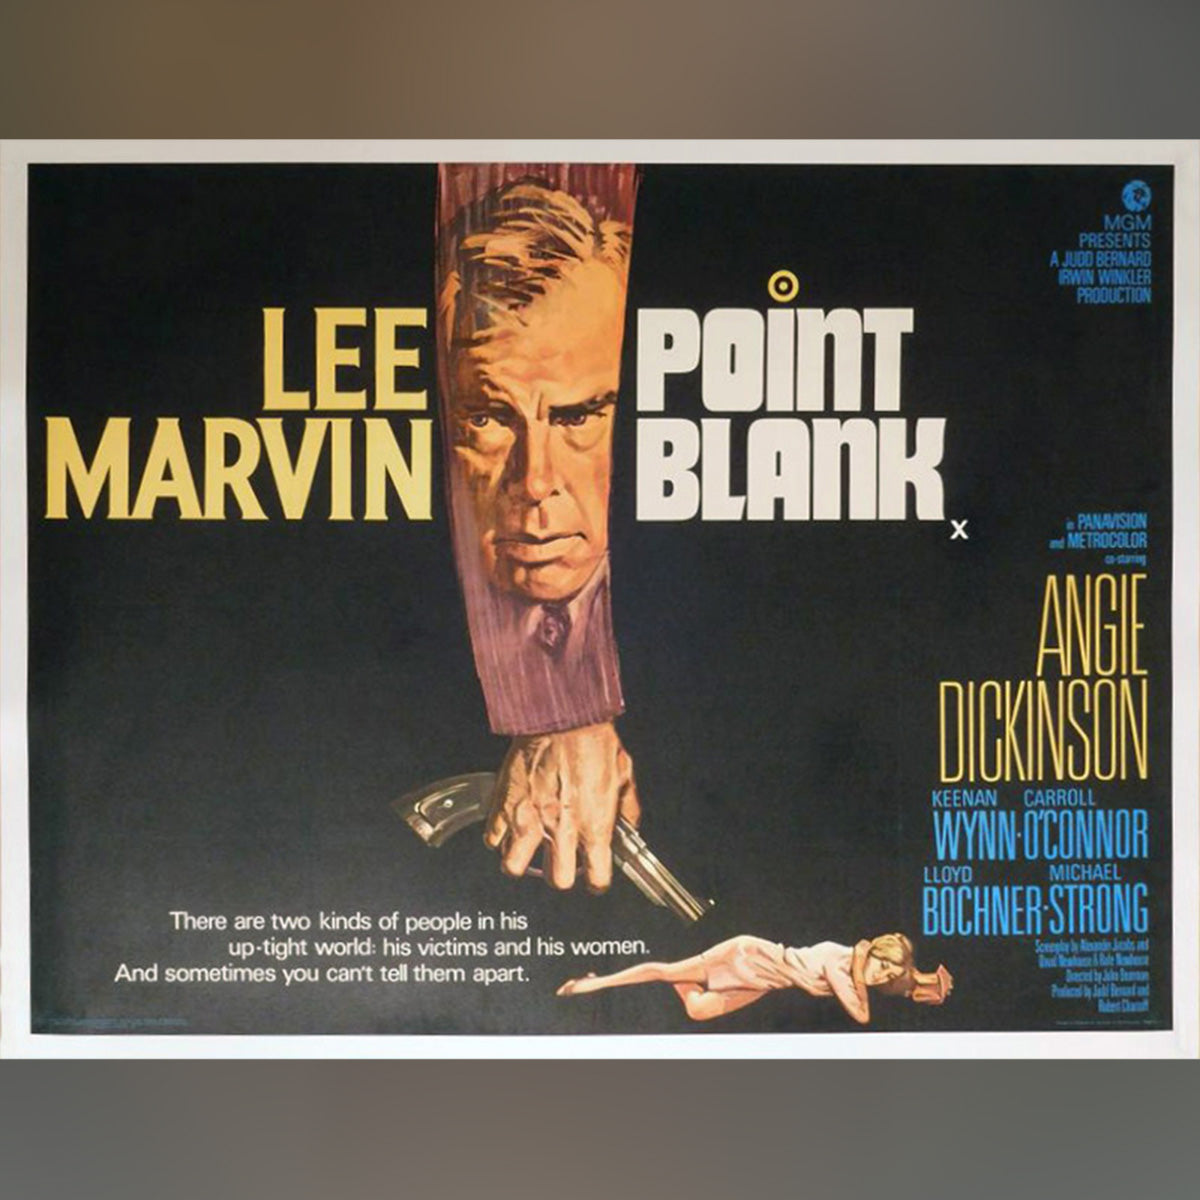 Original Movie Poster of Point Blank (1967)